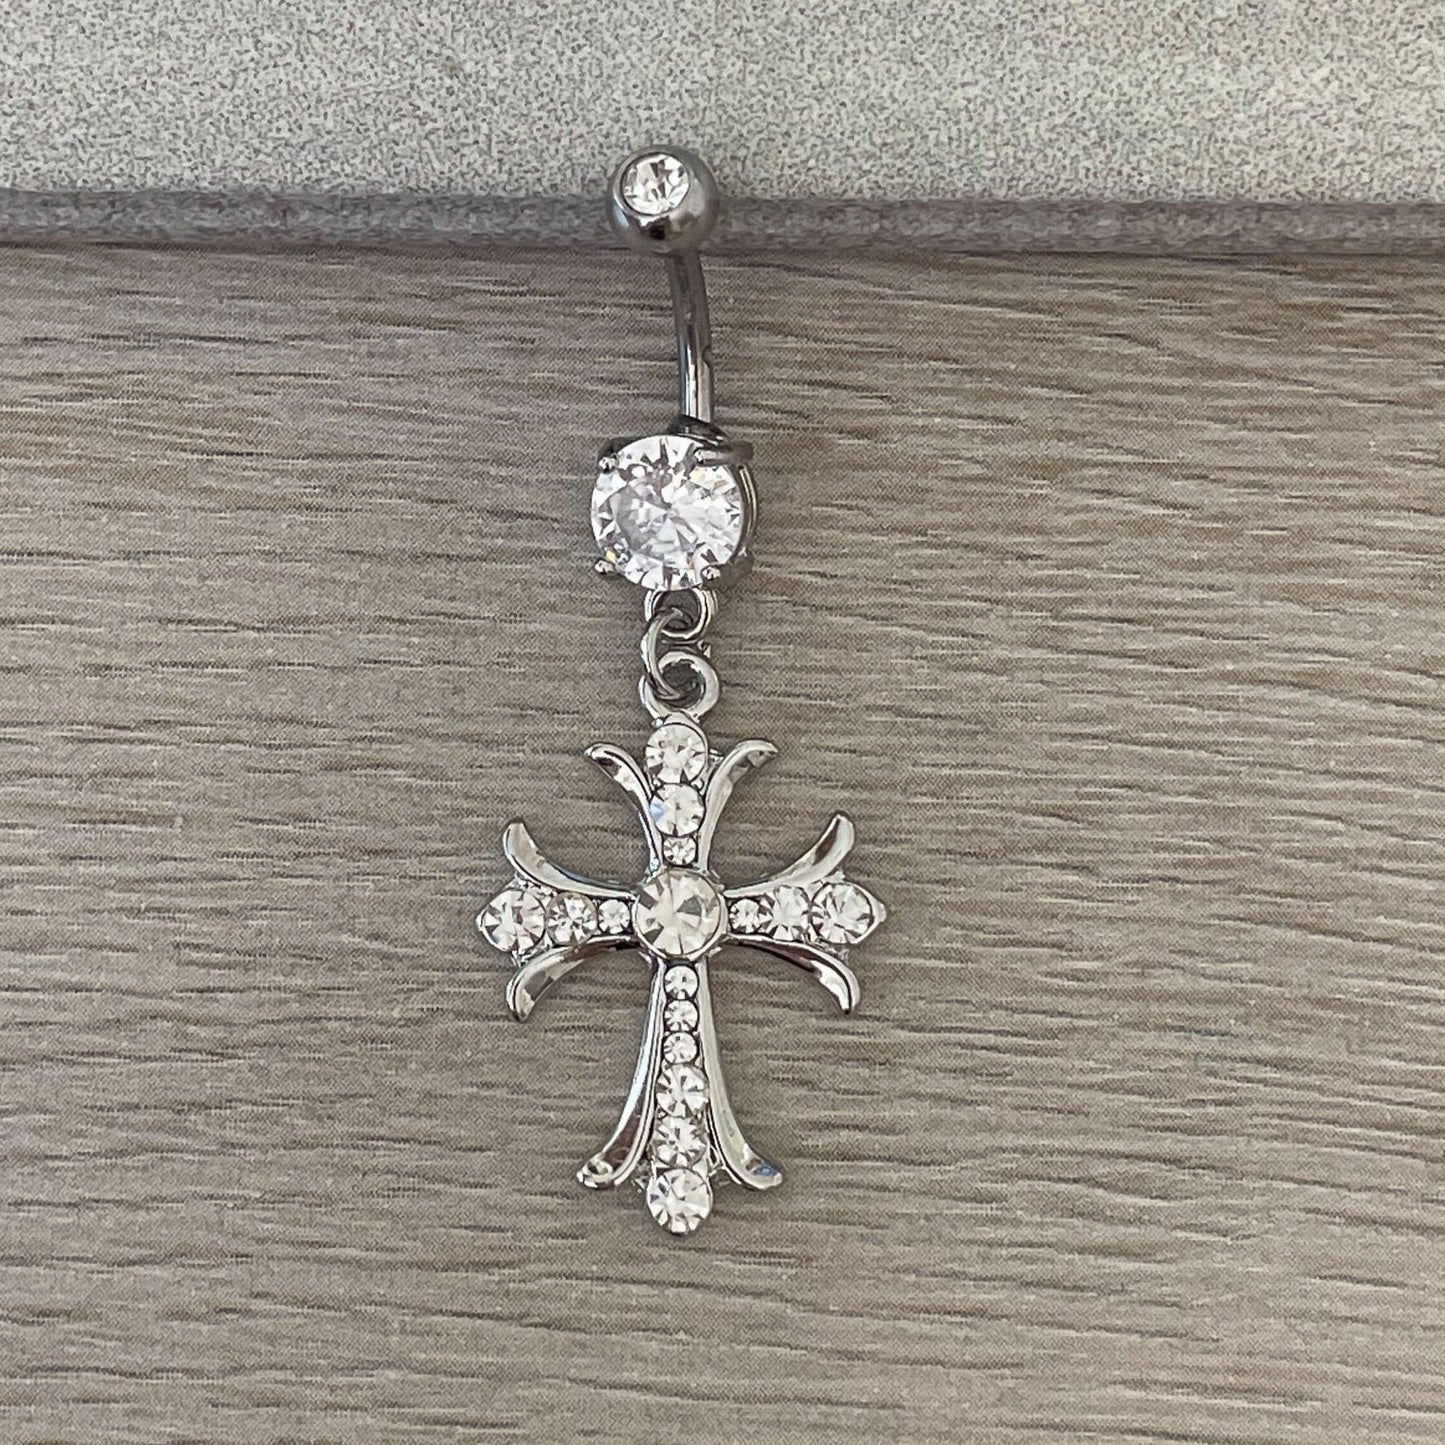 Ornate Gold Cross Belly Button Ring (14G | 10mm | Surgical Steel/14k Gold Plated)